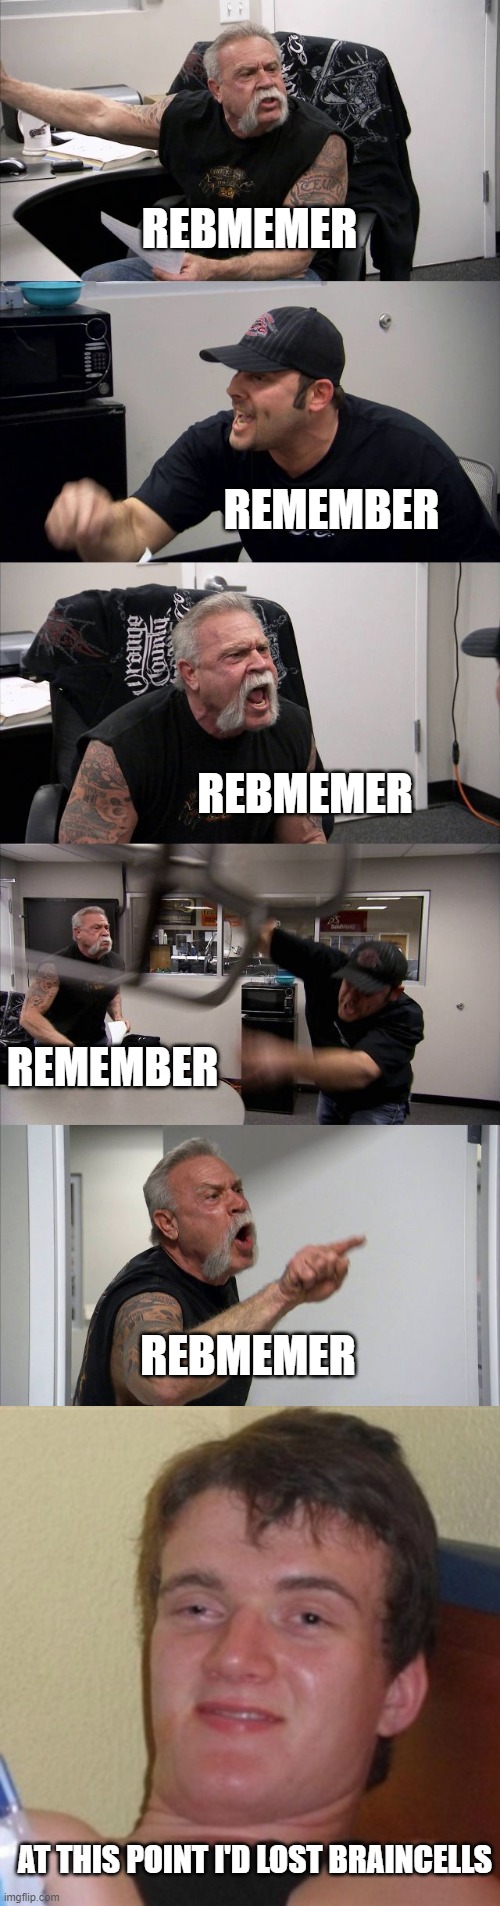 funny humor | REBMEMER; REMEMBER; REBMEMER; REMEMBER; REBMEMER; AT THIS POINT I'D LOST BRAINCELLS | image tagged in memes,american chopper argument,high/drunk guy | made w/ Imgflip meme maker